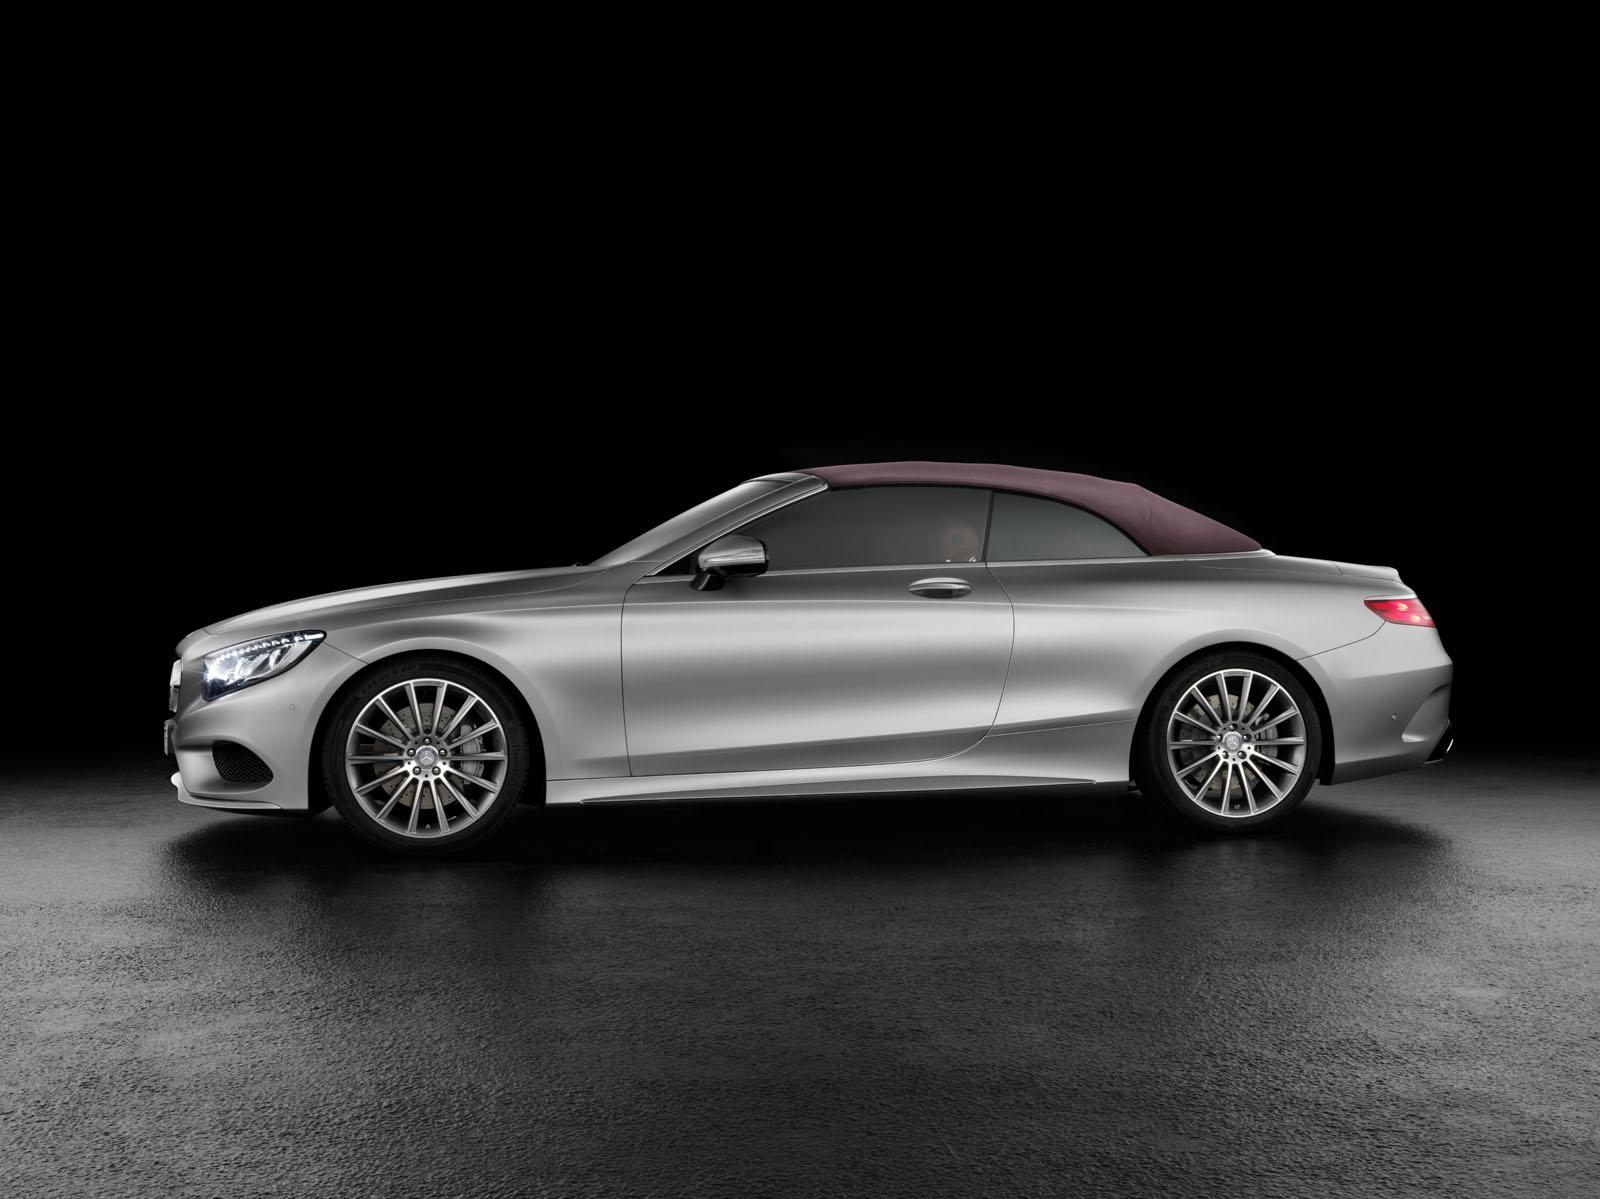 2016 MERCEDES S SERS CABRO RESM GALERS